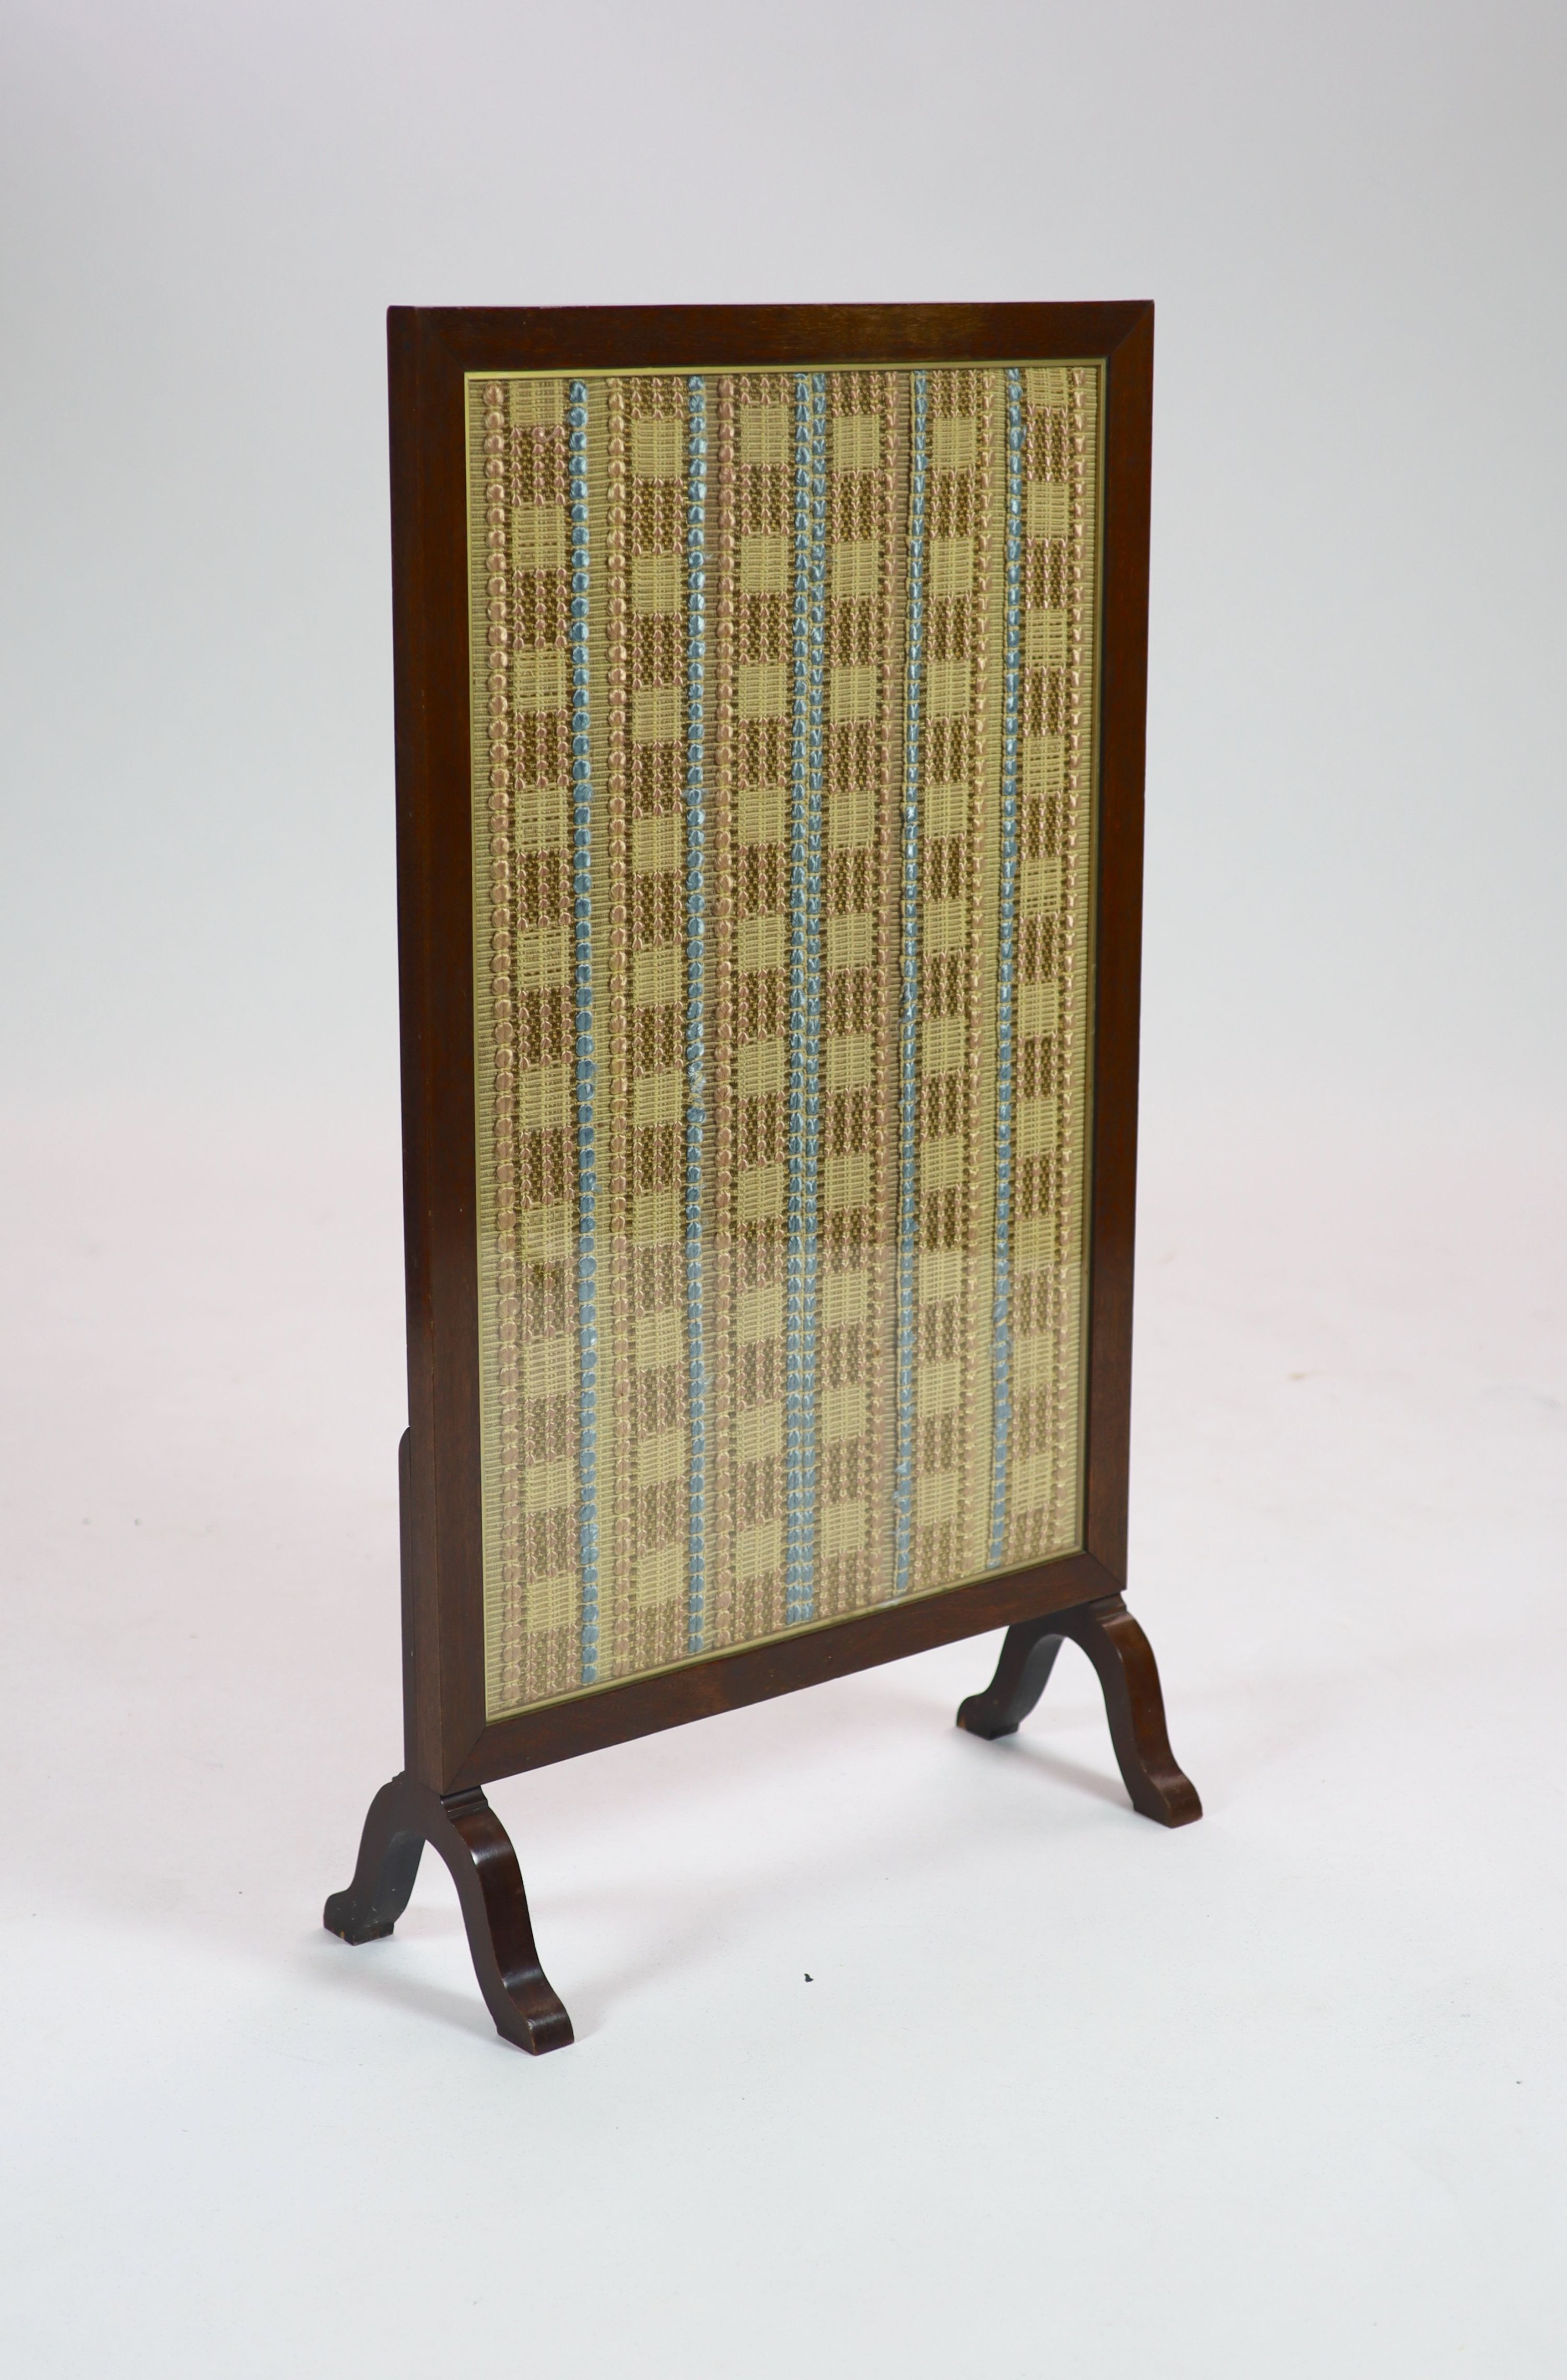 A mahogany cased and glazed embroidered fire screen of Royal interestwith applied inscribed badge - Image 2 of 4